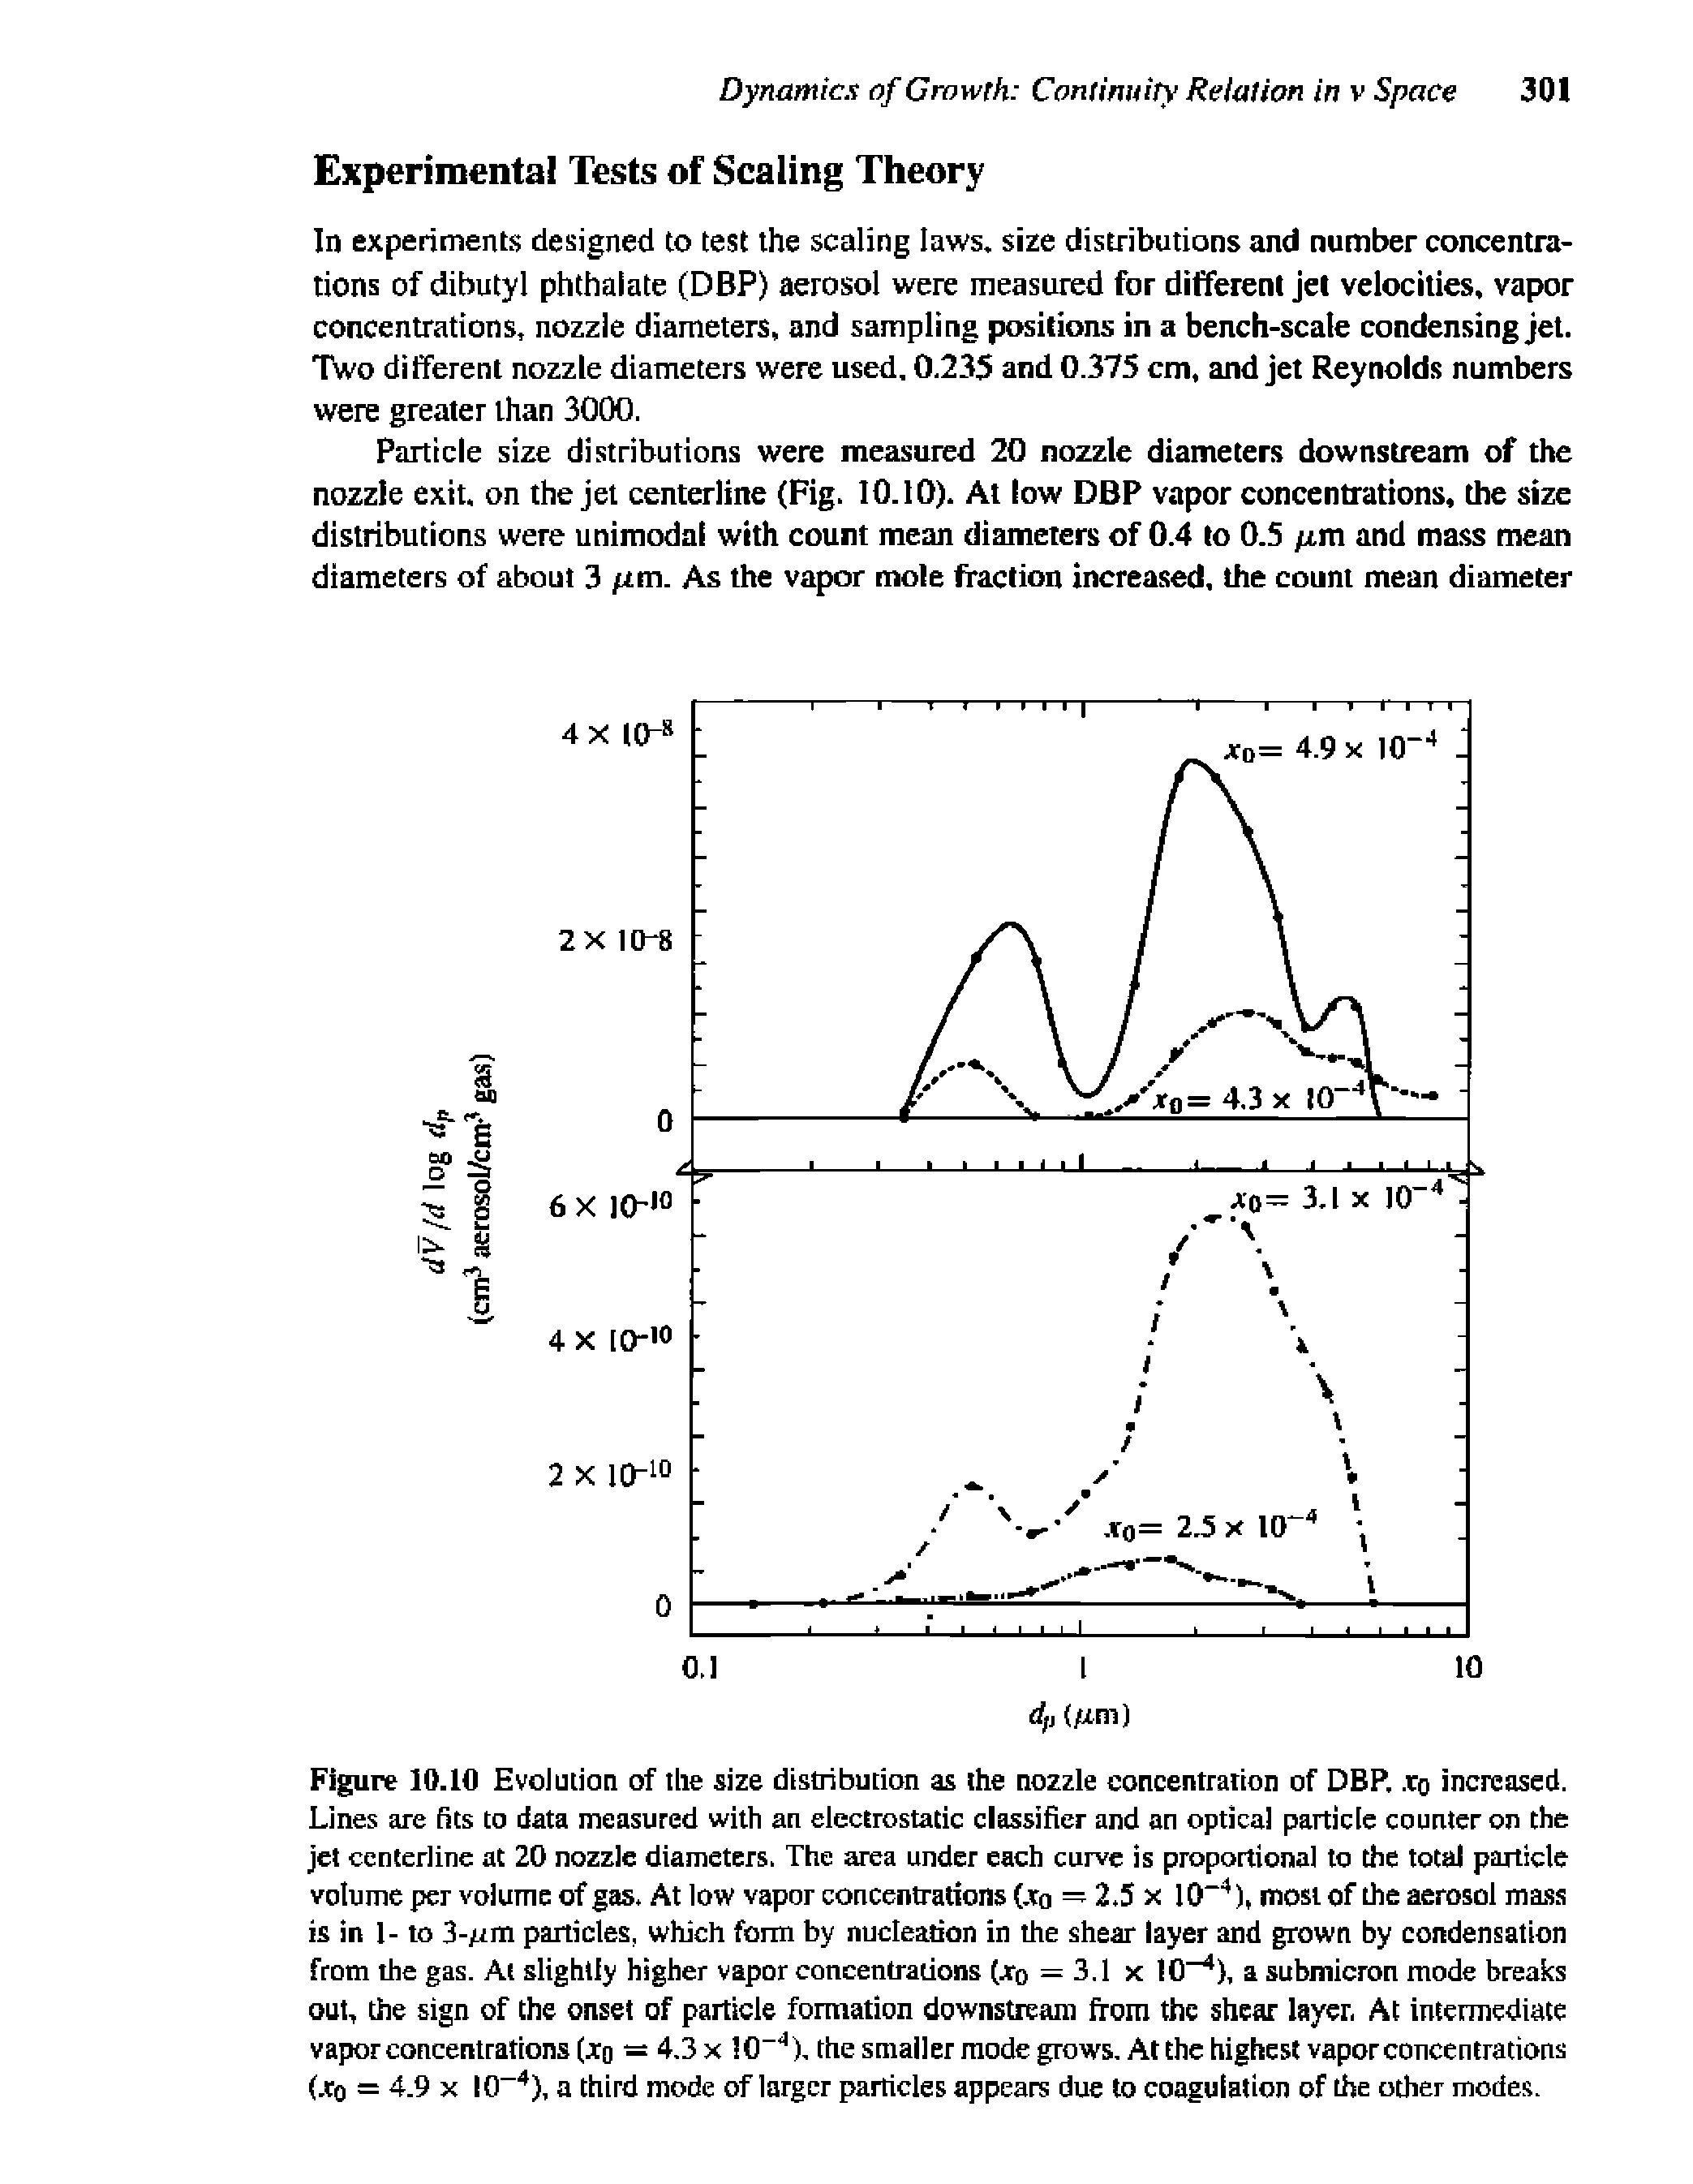 Figure 10.10 Evolution of the size distribution as the nozzle concentration of DBP.. ro increased. Lines are dts to data measured with an electrostatic classifler and an optical particle counter on the jet centerline at 20 nozzle diameters. The area under each curve is proportional to the total particle volume per volume of gas. At low vapor concentrations (.to 2.5 x lO"" ), most of the aerosol ma.ss is in 1- to 3-/rm particles, which form by nudeation in the shear layer and grown by condensation from the gas. At slightly higher vapor concentrations (jtq = 3.1 x 10 ), a submicron mode breaks out, the sign of the onset of particle formation downstream from the shear layer, At intermediate vapor concentrations (zq = 4,3x 10 ), the smaller mode grows. At the highest vapor concentrations (.ro = 4.9 X 10 ), a third mode of larger particles appears due to coagulation of the other modes.